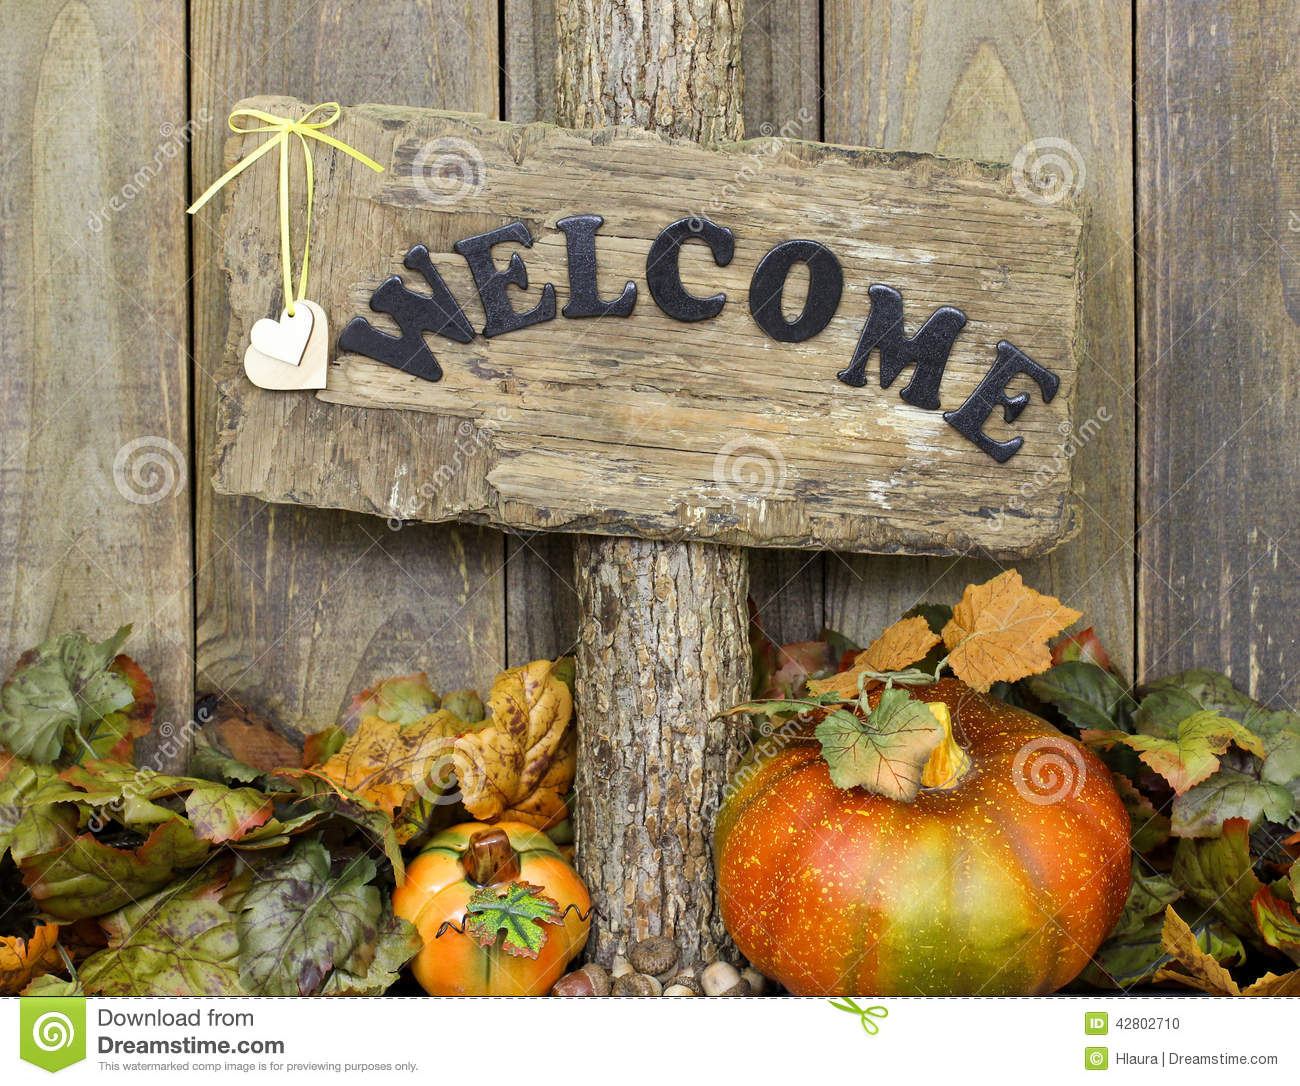     Sign With Hearts And Fall Foliage Border With Pumpkins And Acorns